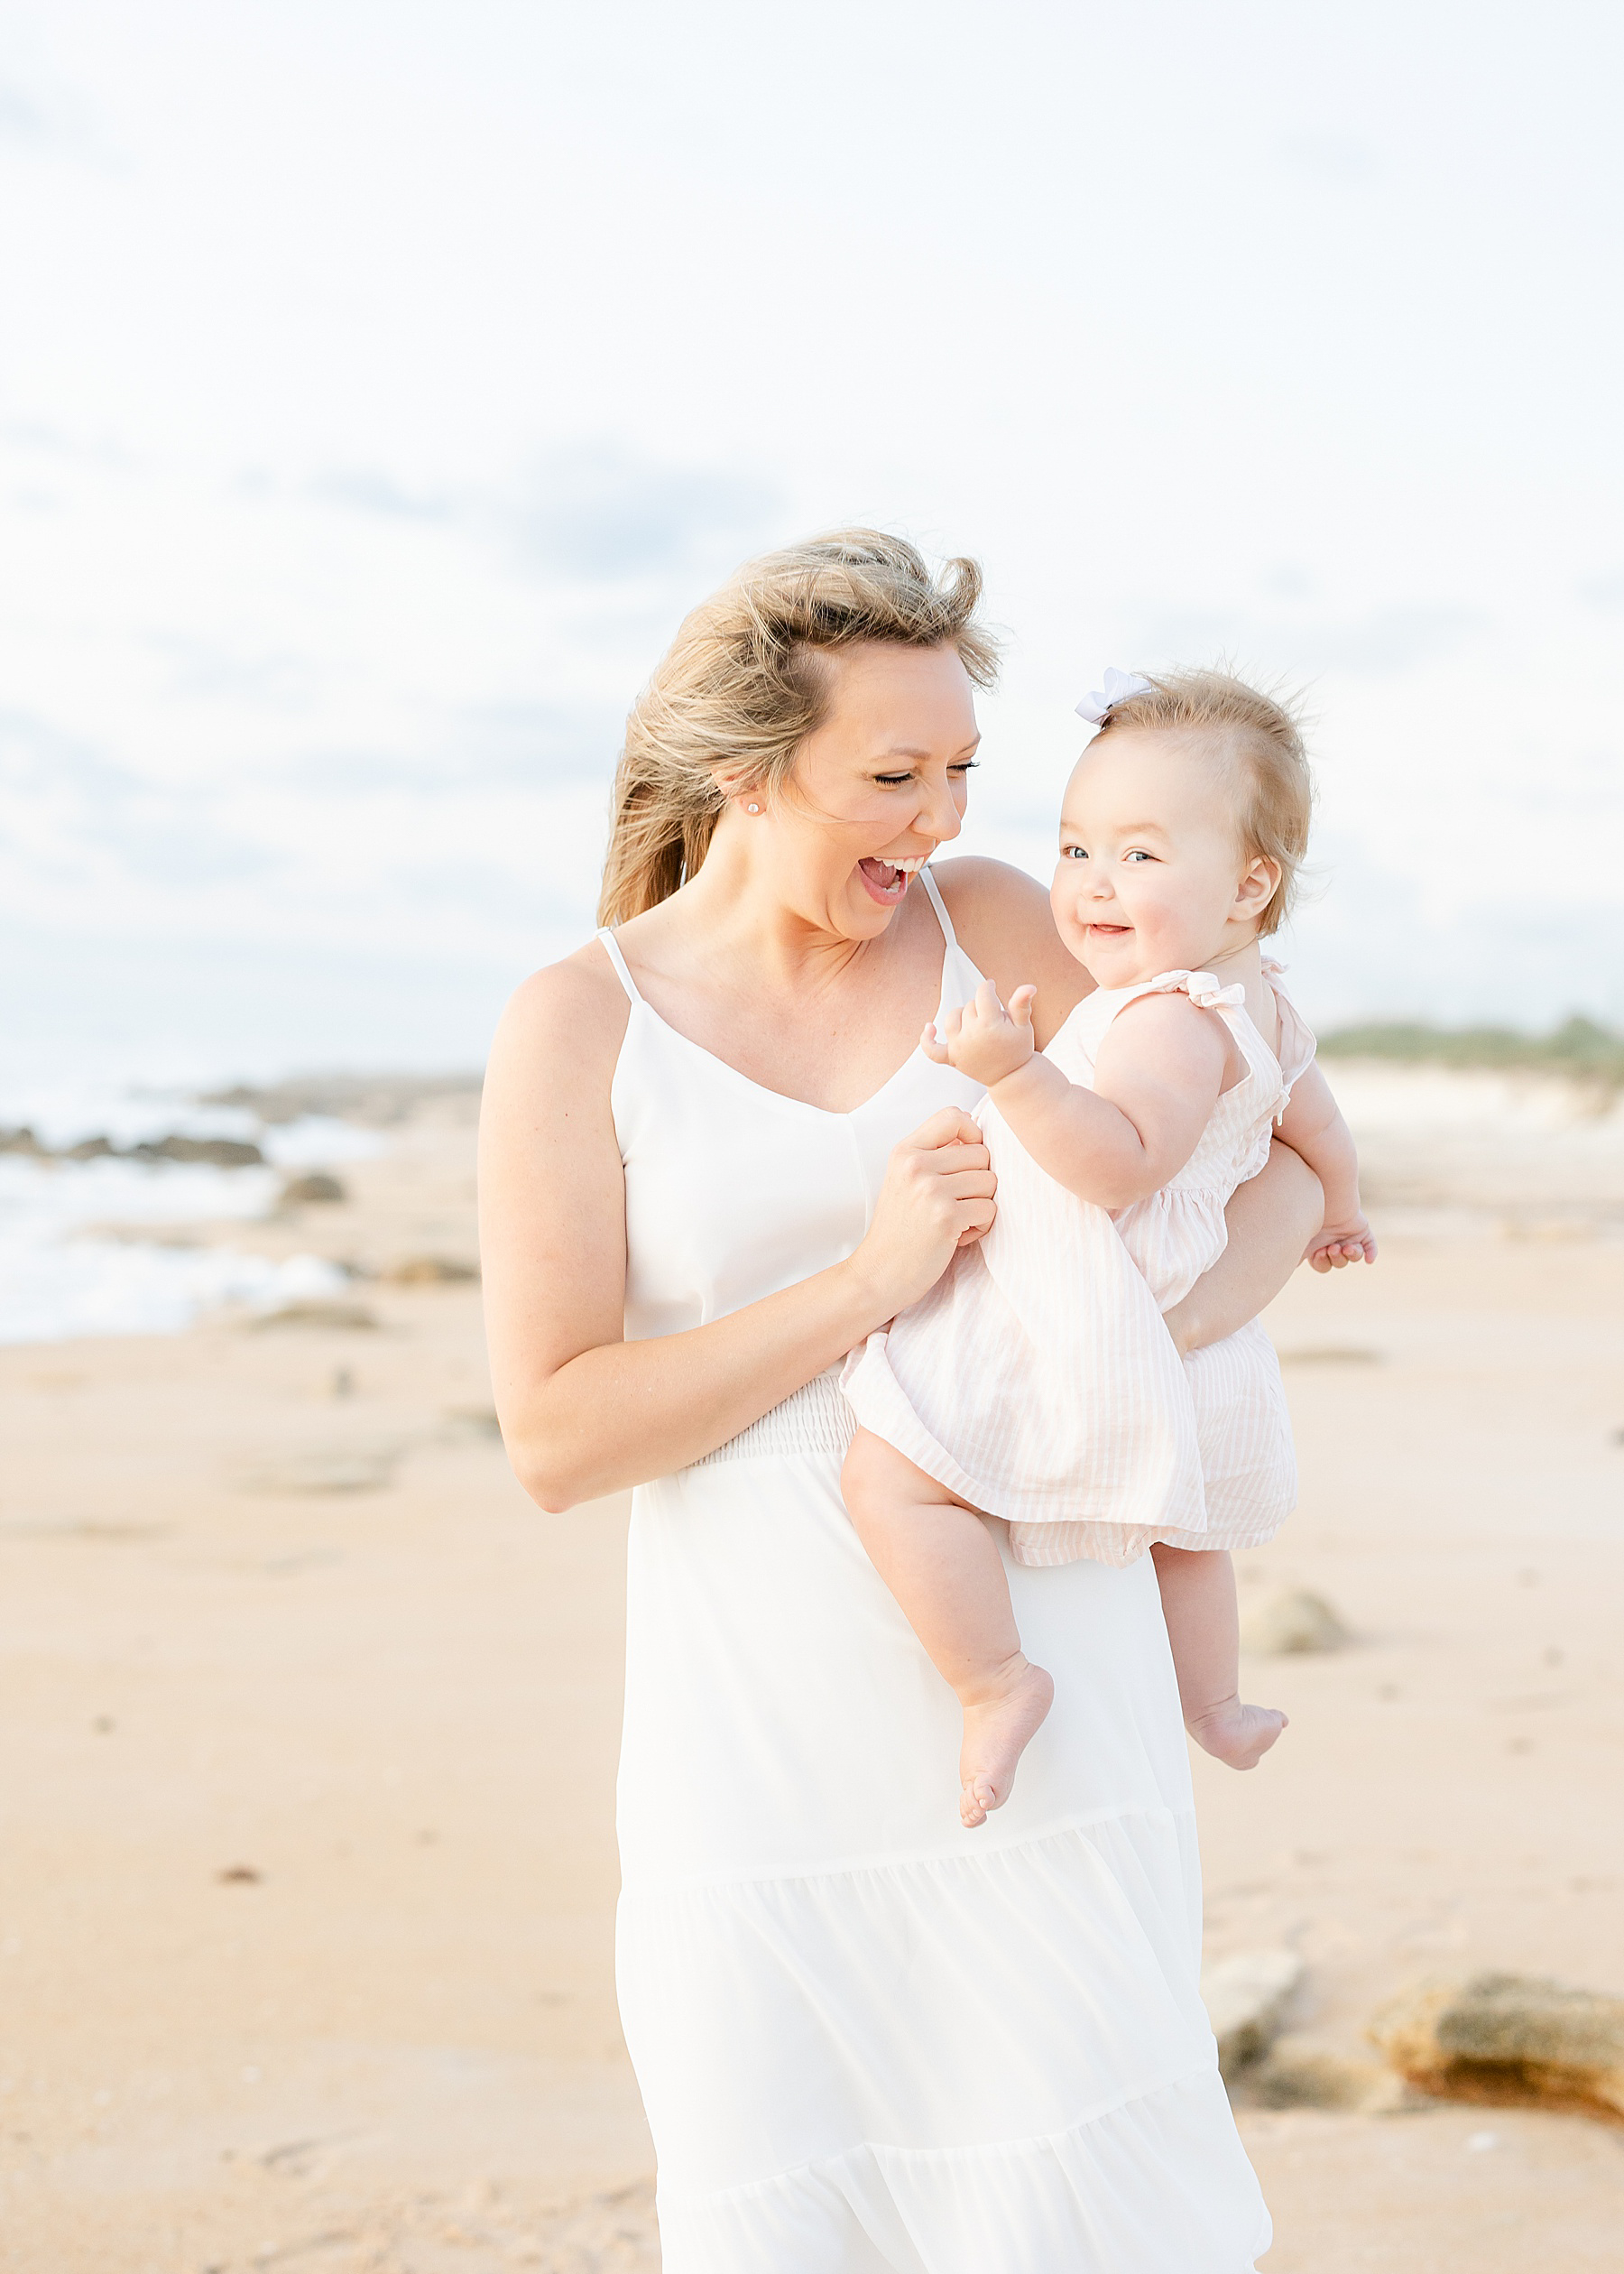 woman holding baby girl on the beach at sunrise wearing long white dress